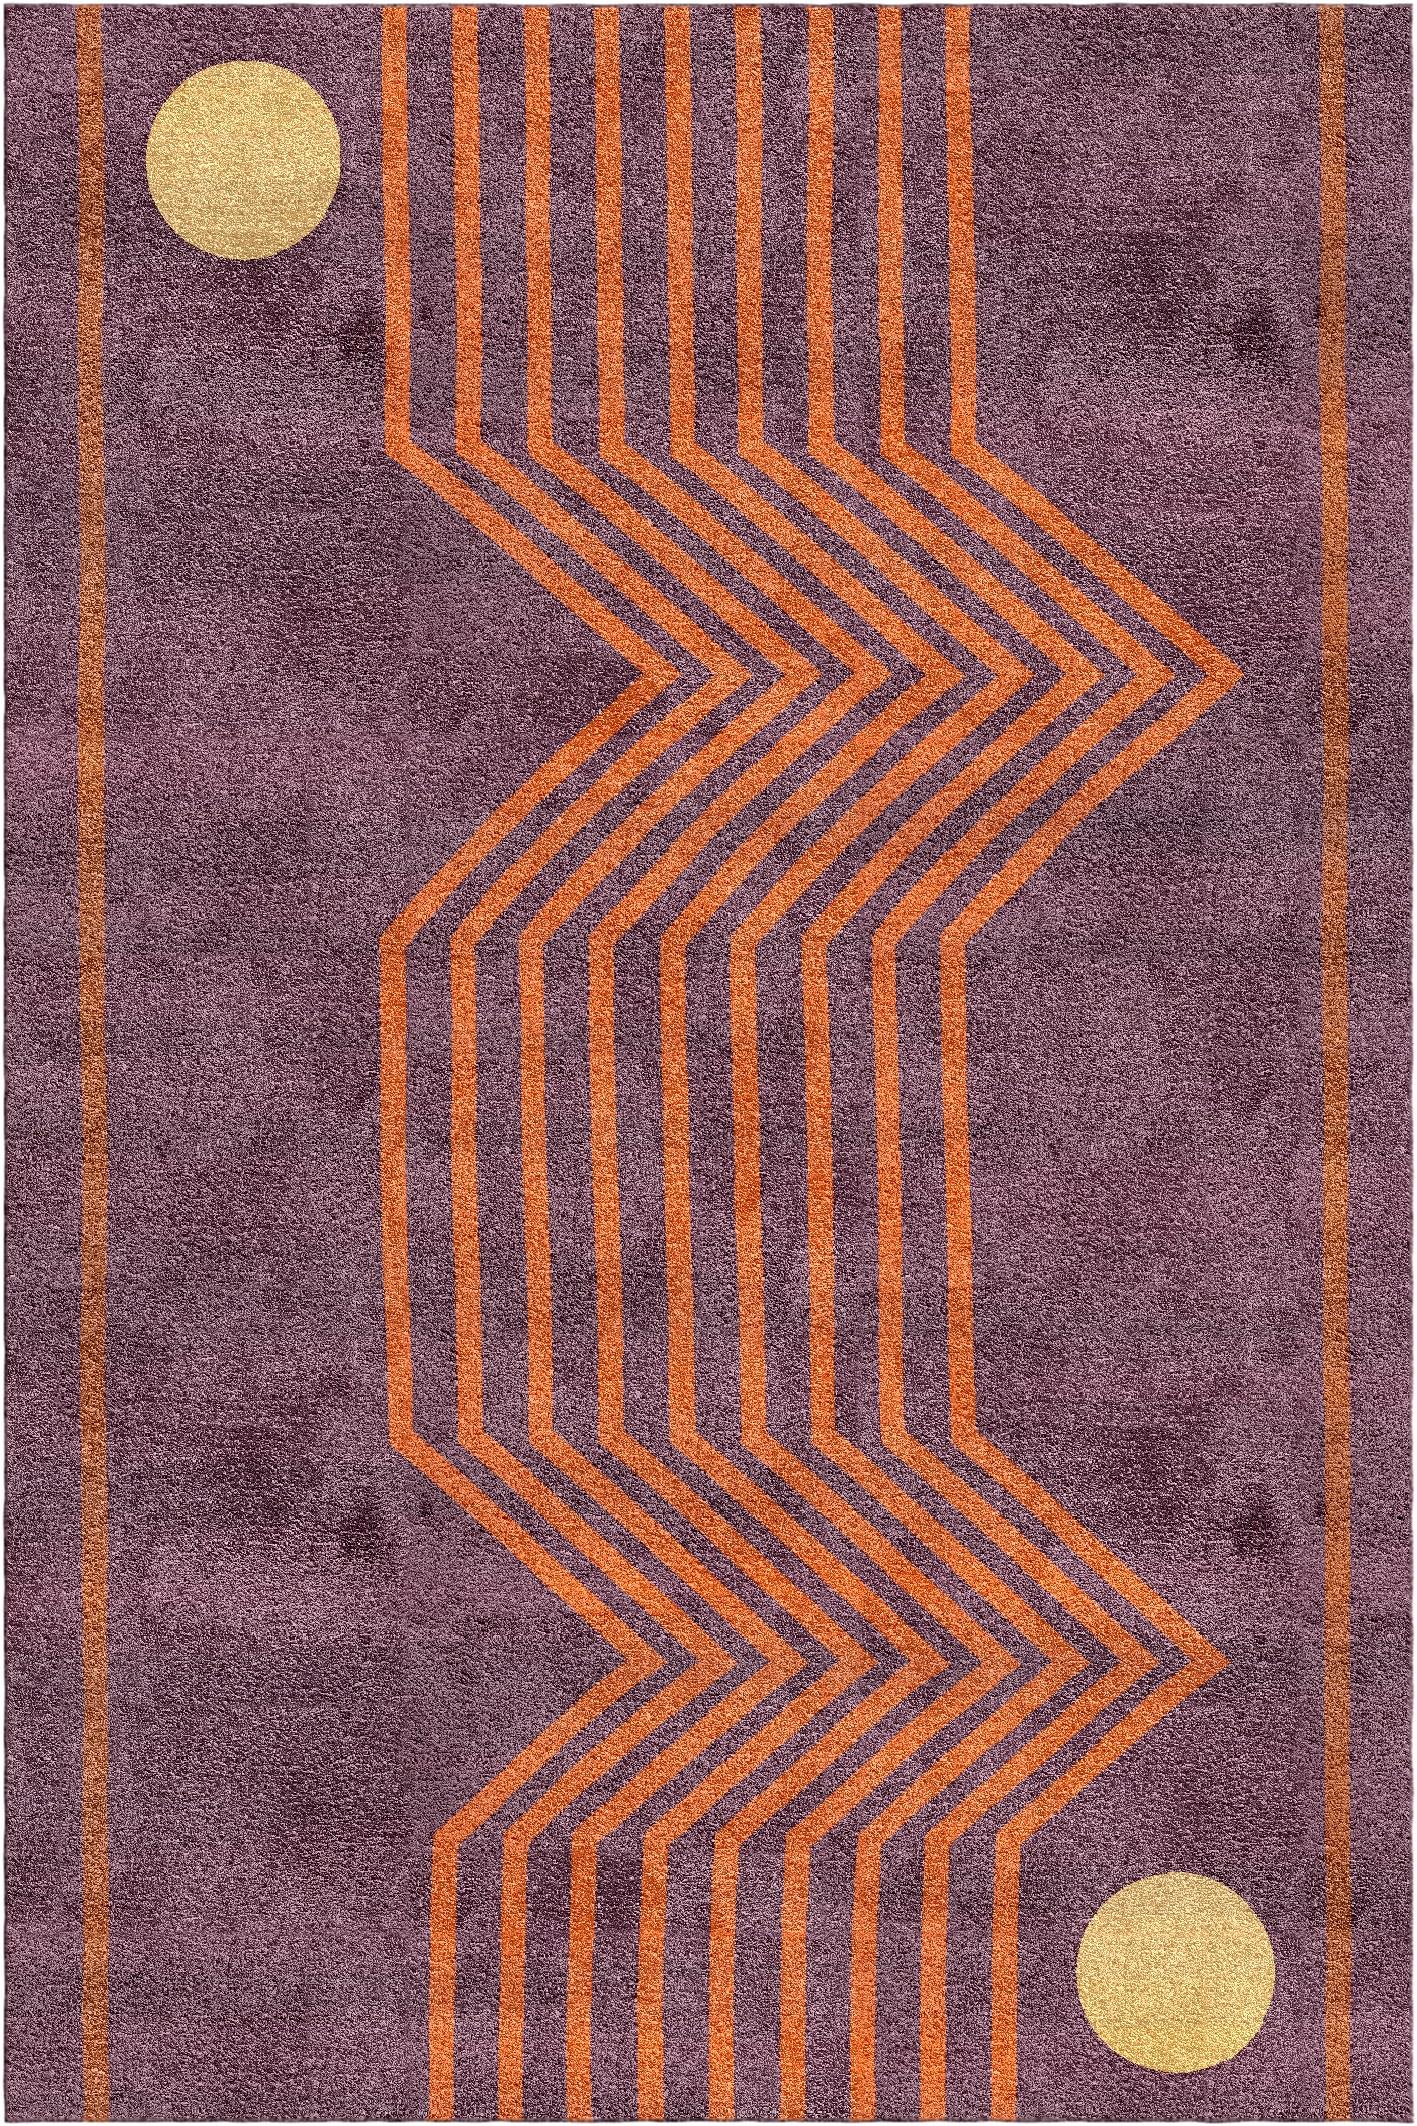 Hand-Crafted Futuro Rug VI by Vanessa Ordoñez For Sale